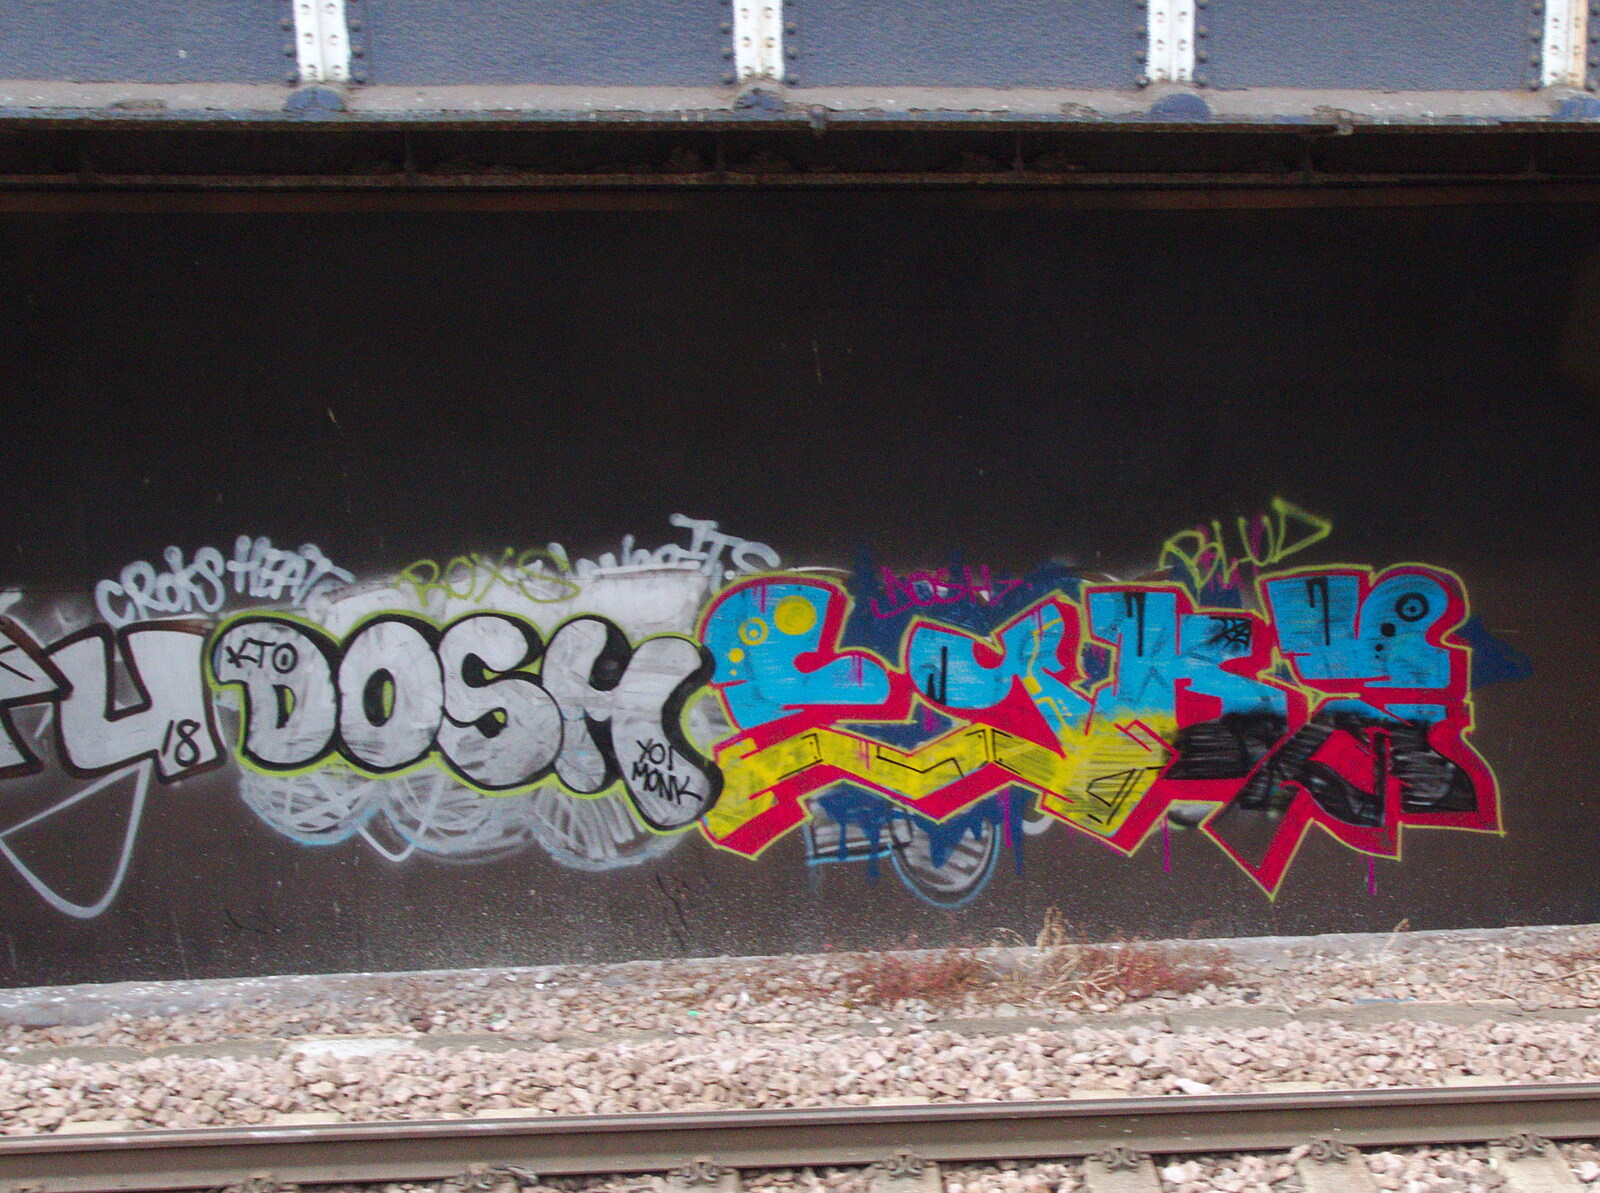 New graffiti next to an old Dosh tag from The BSCC at Redgrave and Railway Graffiti, Suffolk and London - 7th August 2019